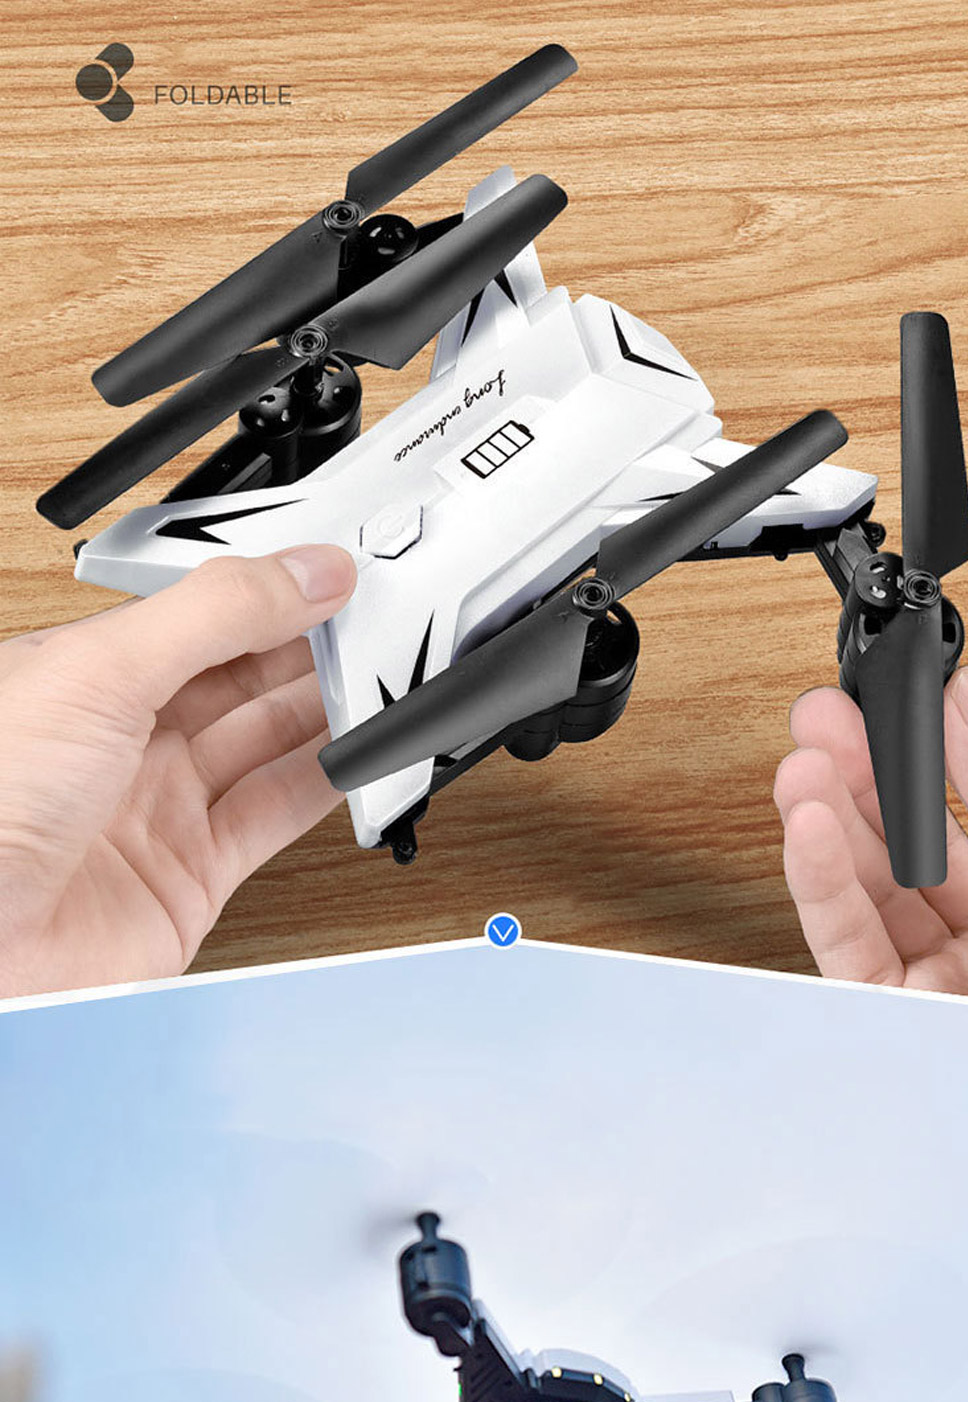 601s foldable drone